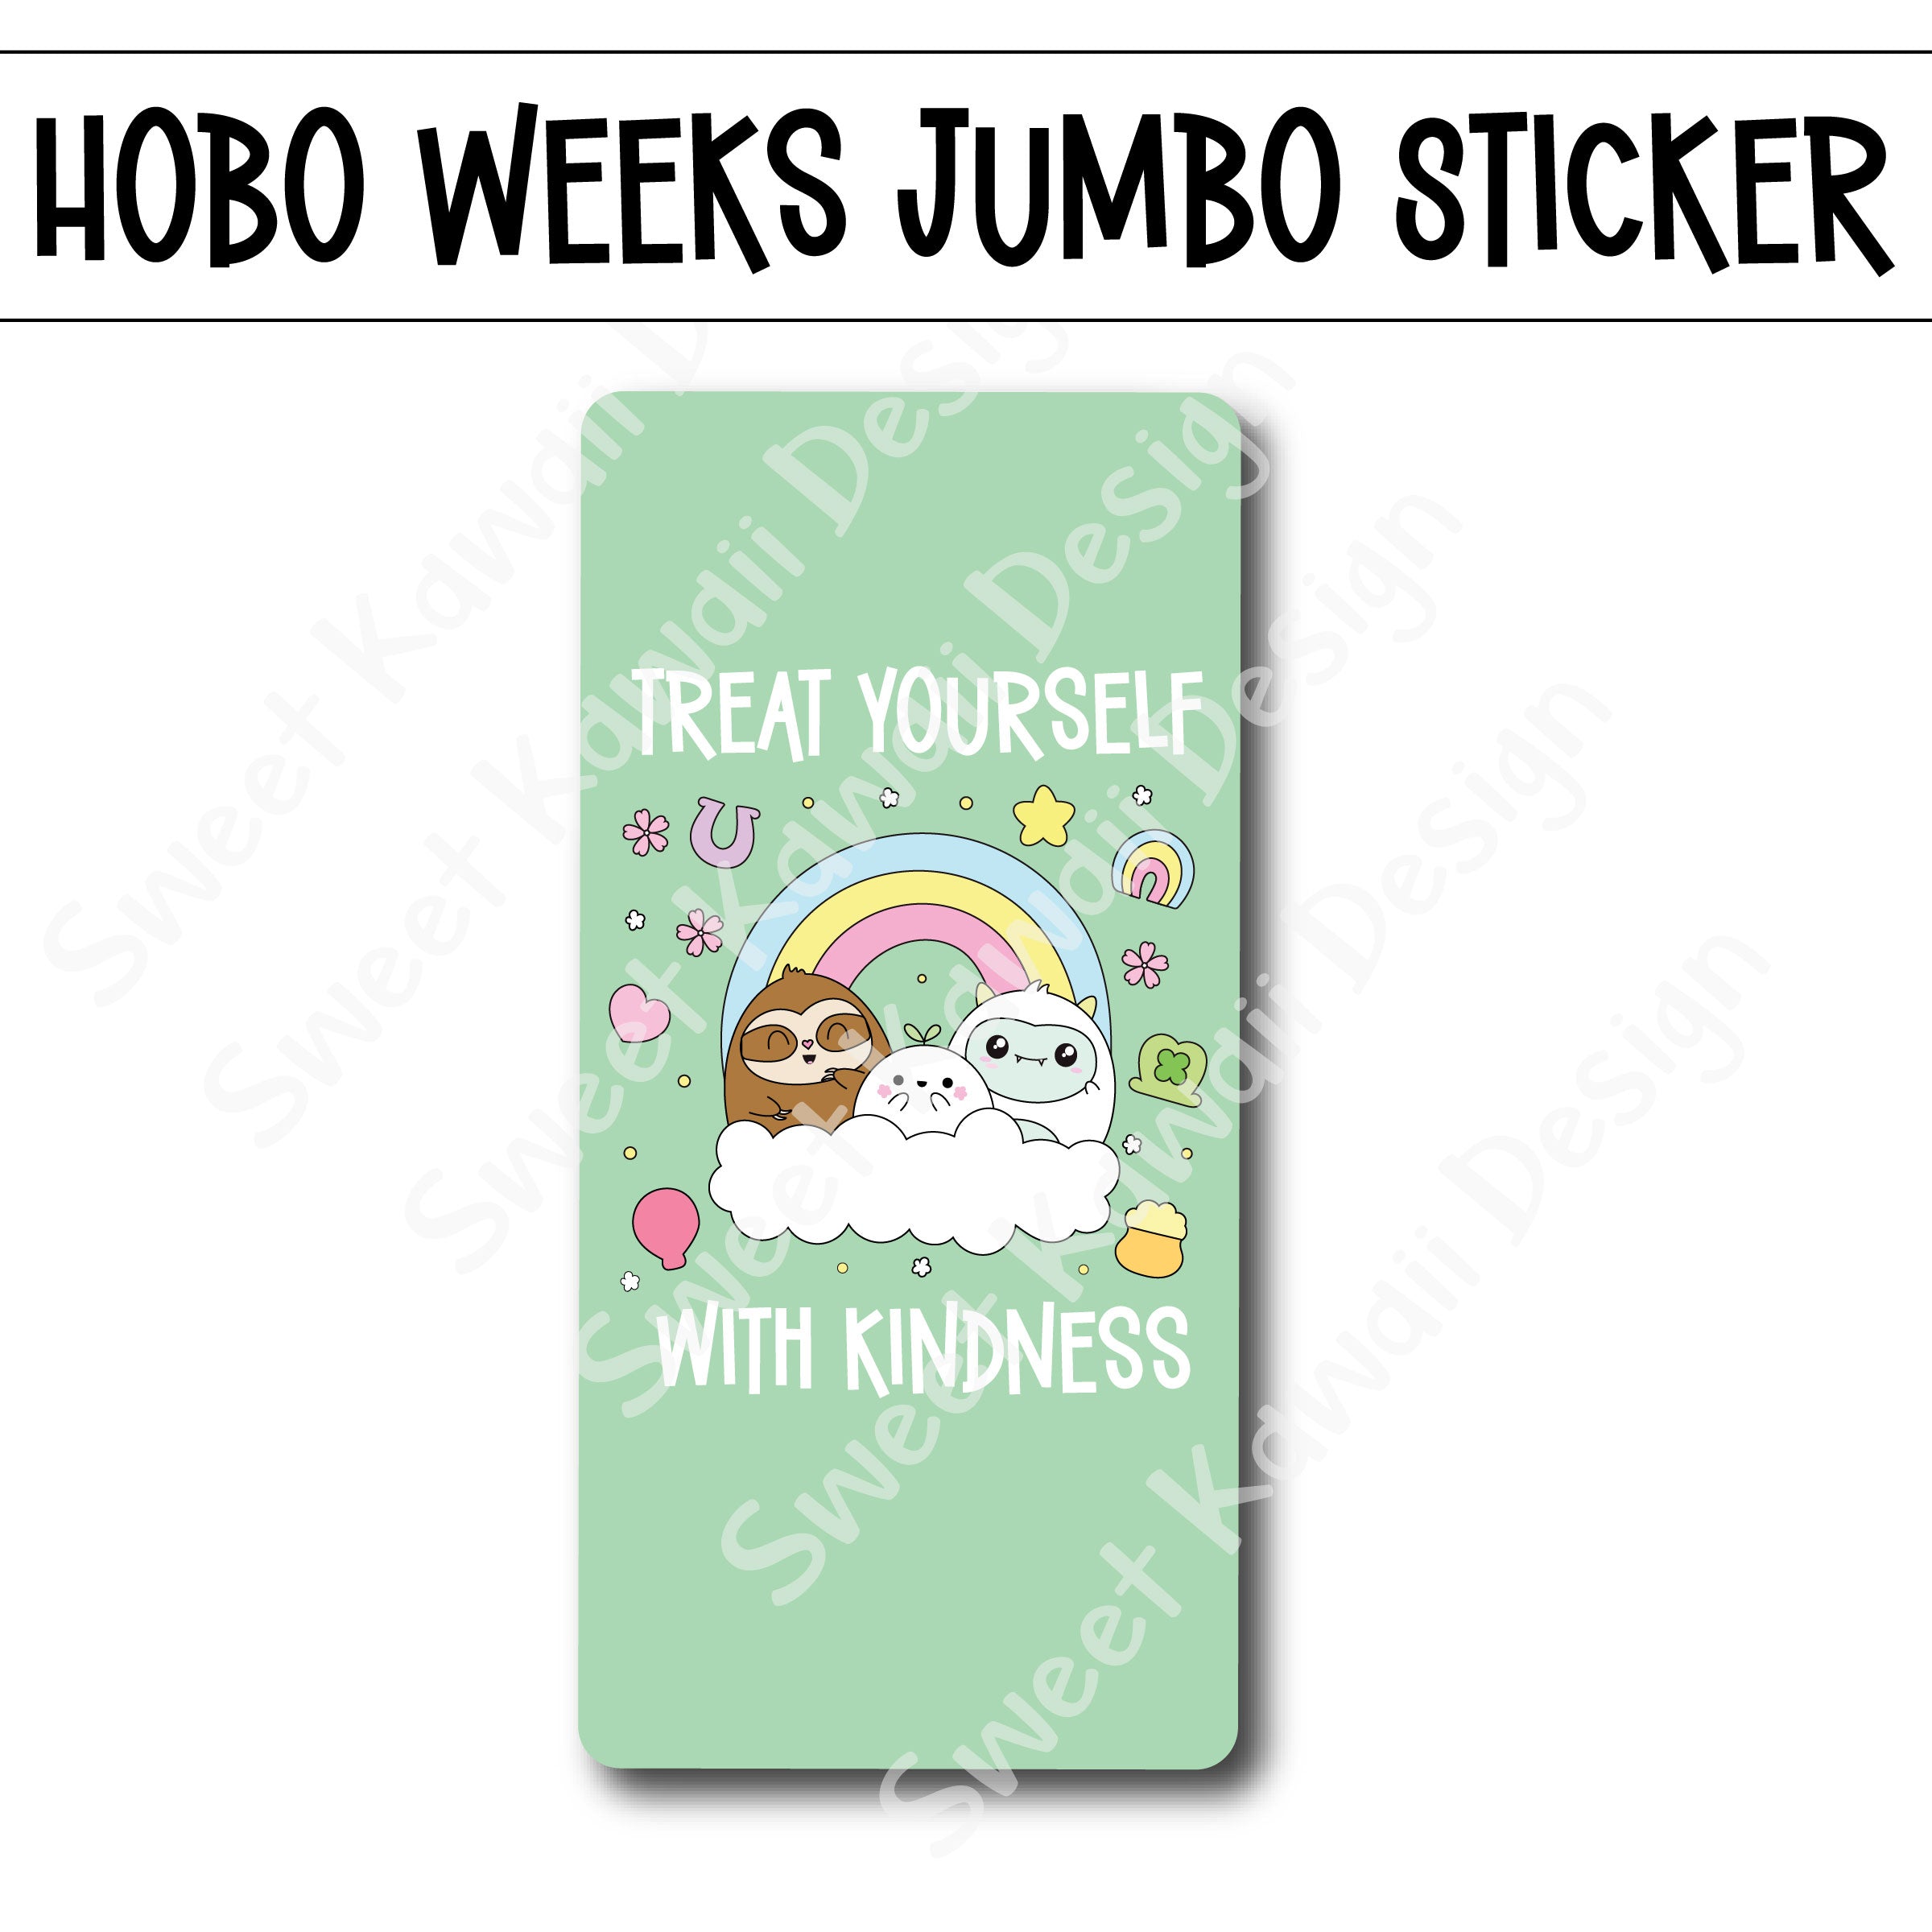 Kawaii Jumbo Sticker - Treat Yourself With Kindness - Size Options Available